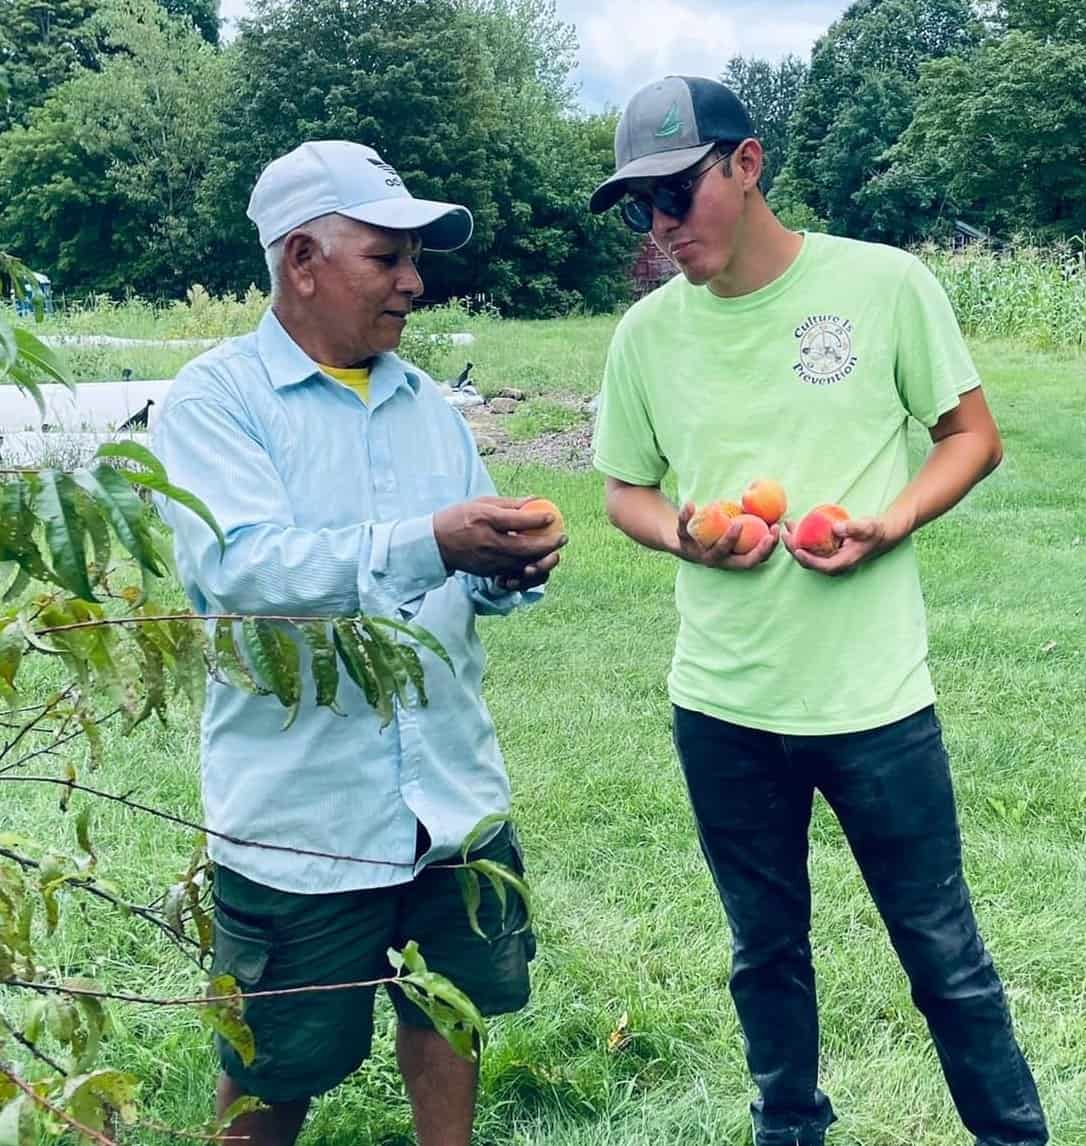 Salt City Harvest Farm Executive Director Jacob Gigler-Caro wears a t-shirt and jeans while talking to a farmer in their apple orchard.